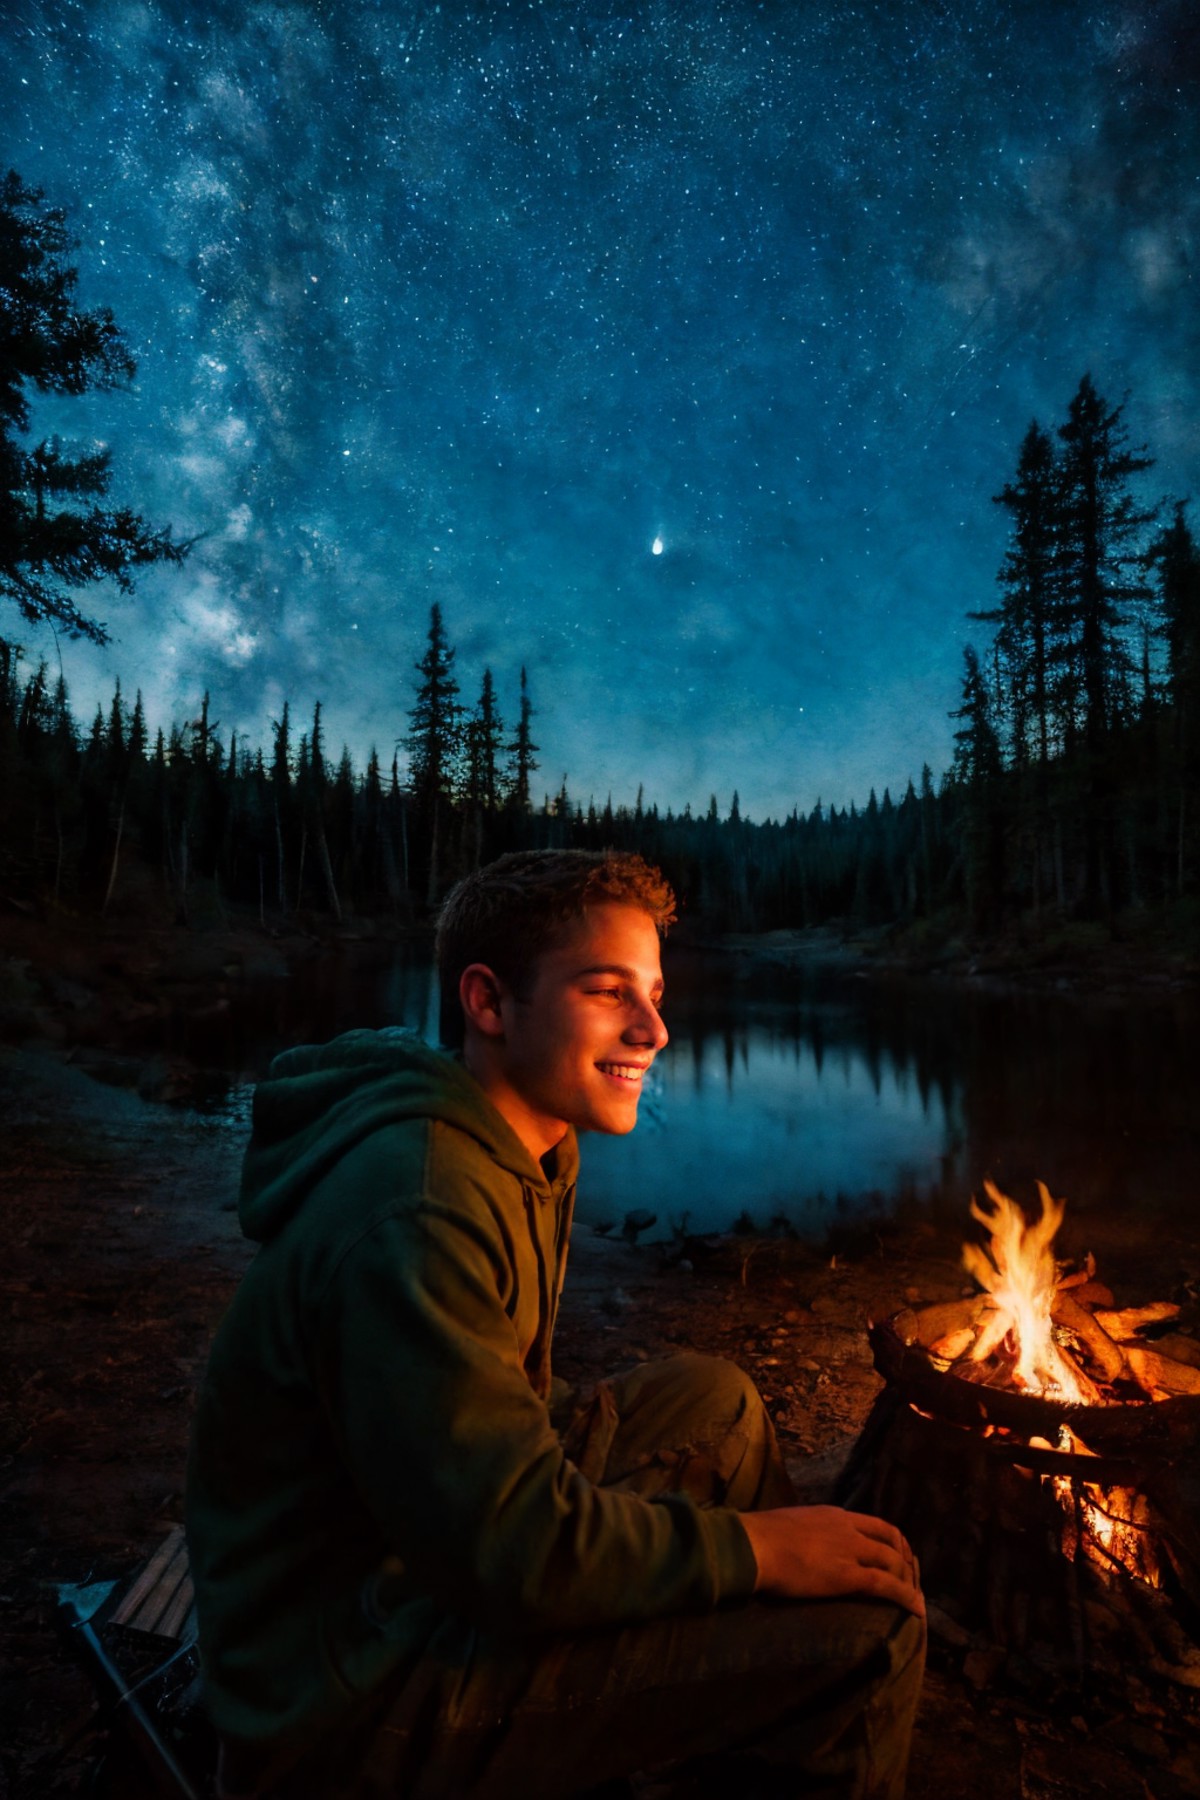 Outdoors nighttime, solo, focus on 1man, 20yo slim dg_ShawnPyfrom, wearing hoodie, sitting in front of a campfire, relaxed...